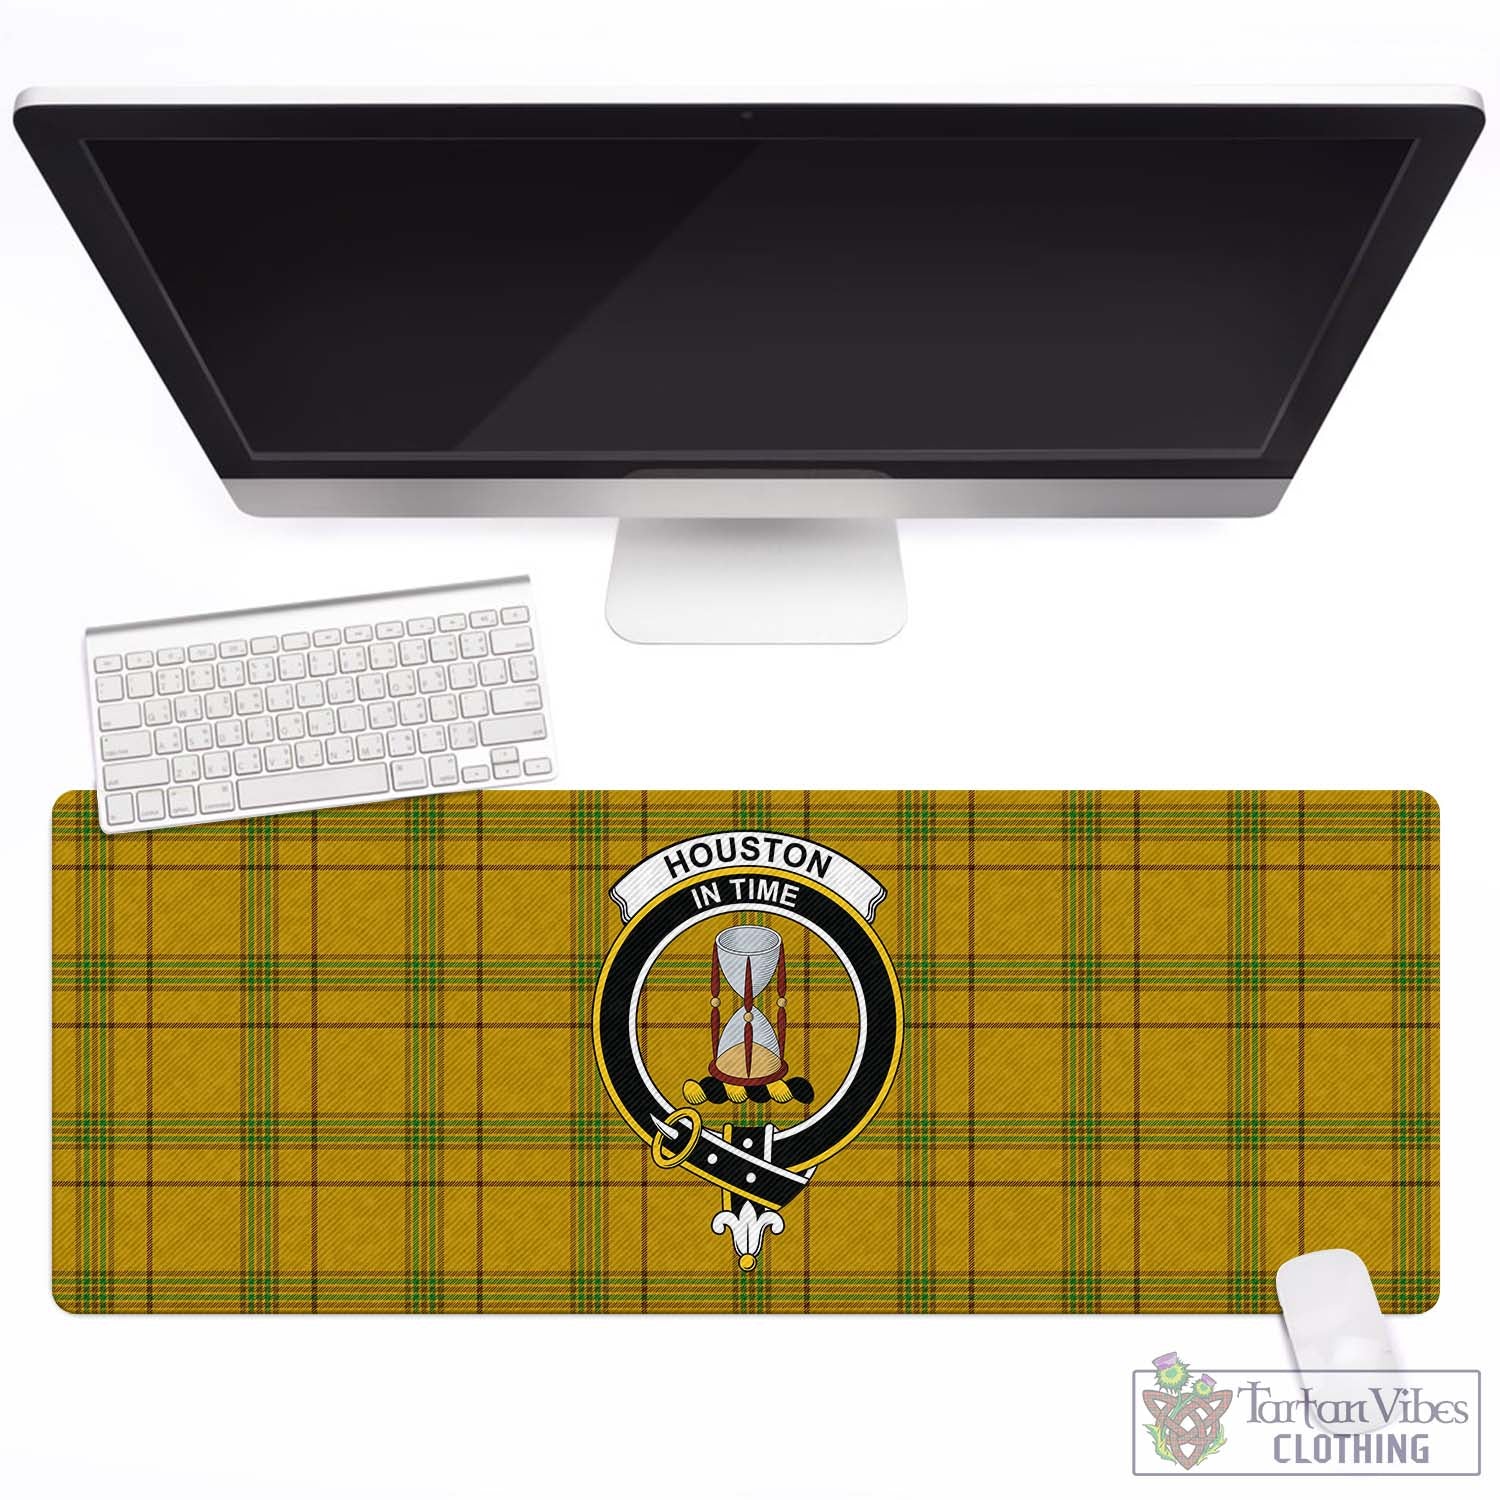 Tartan Vibes Clothing Houston Tartan Mouse Pad with Family Crest